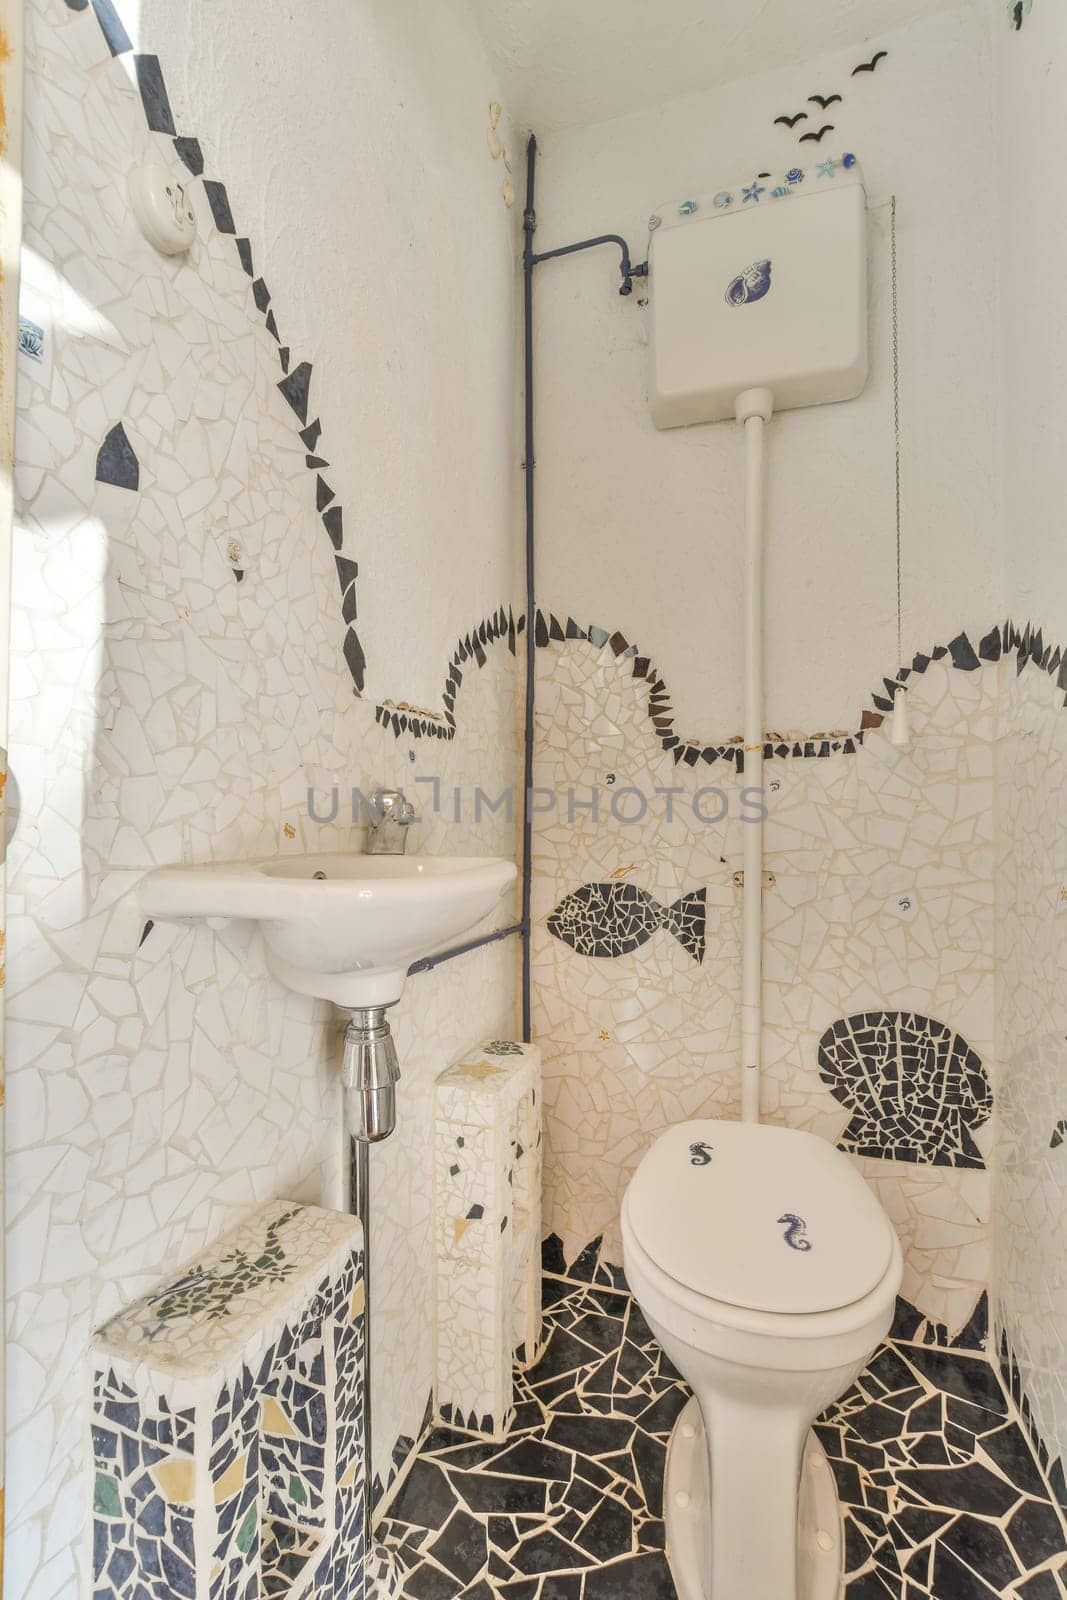 a bathroom with mosaic tiles on the walls and floor, including a toilet in the middle part of the room